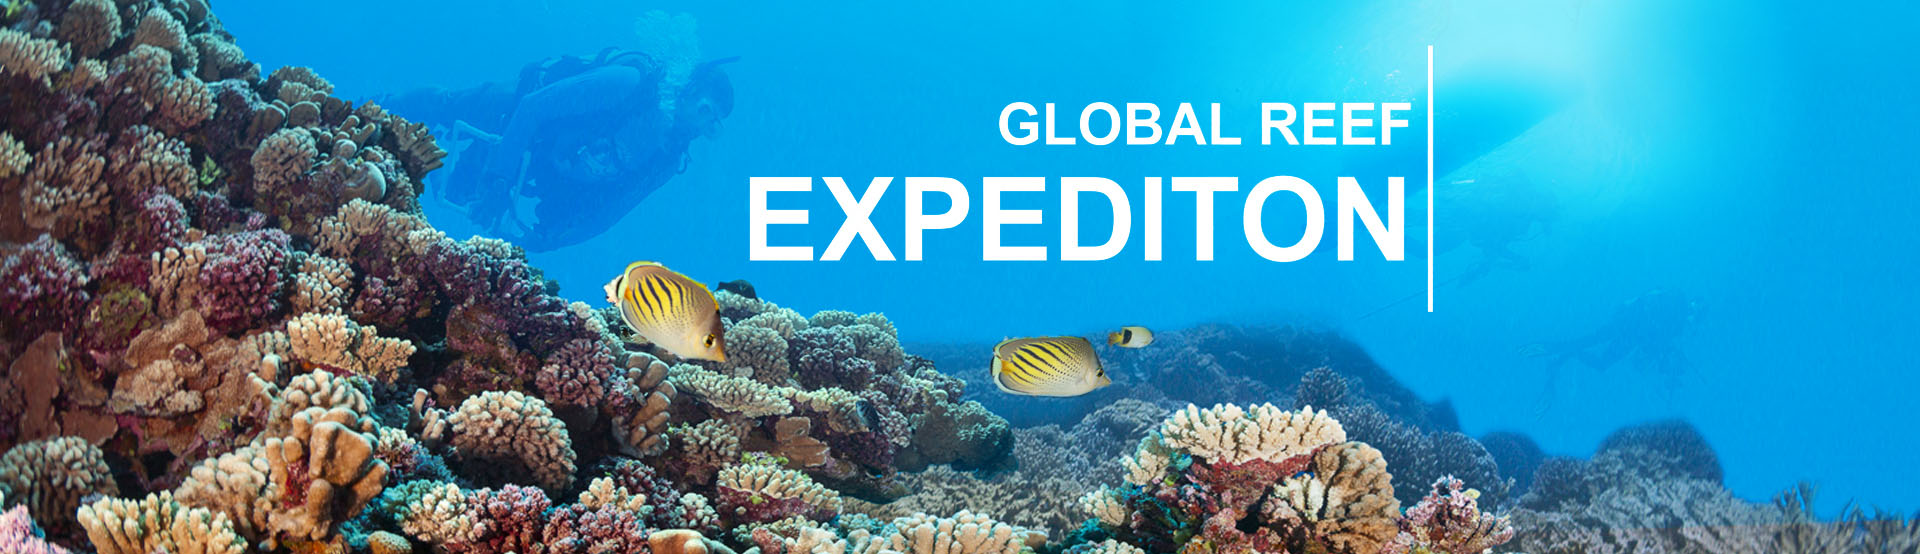 Global Reef Expedition